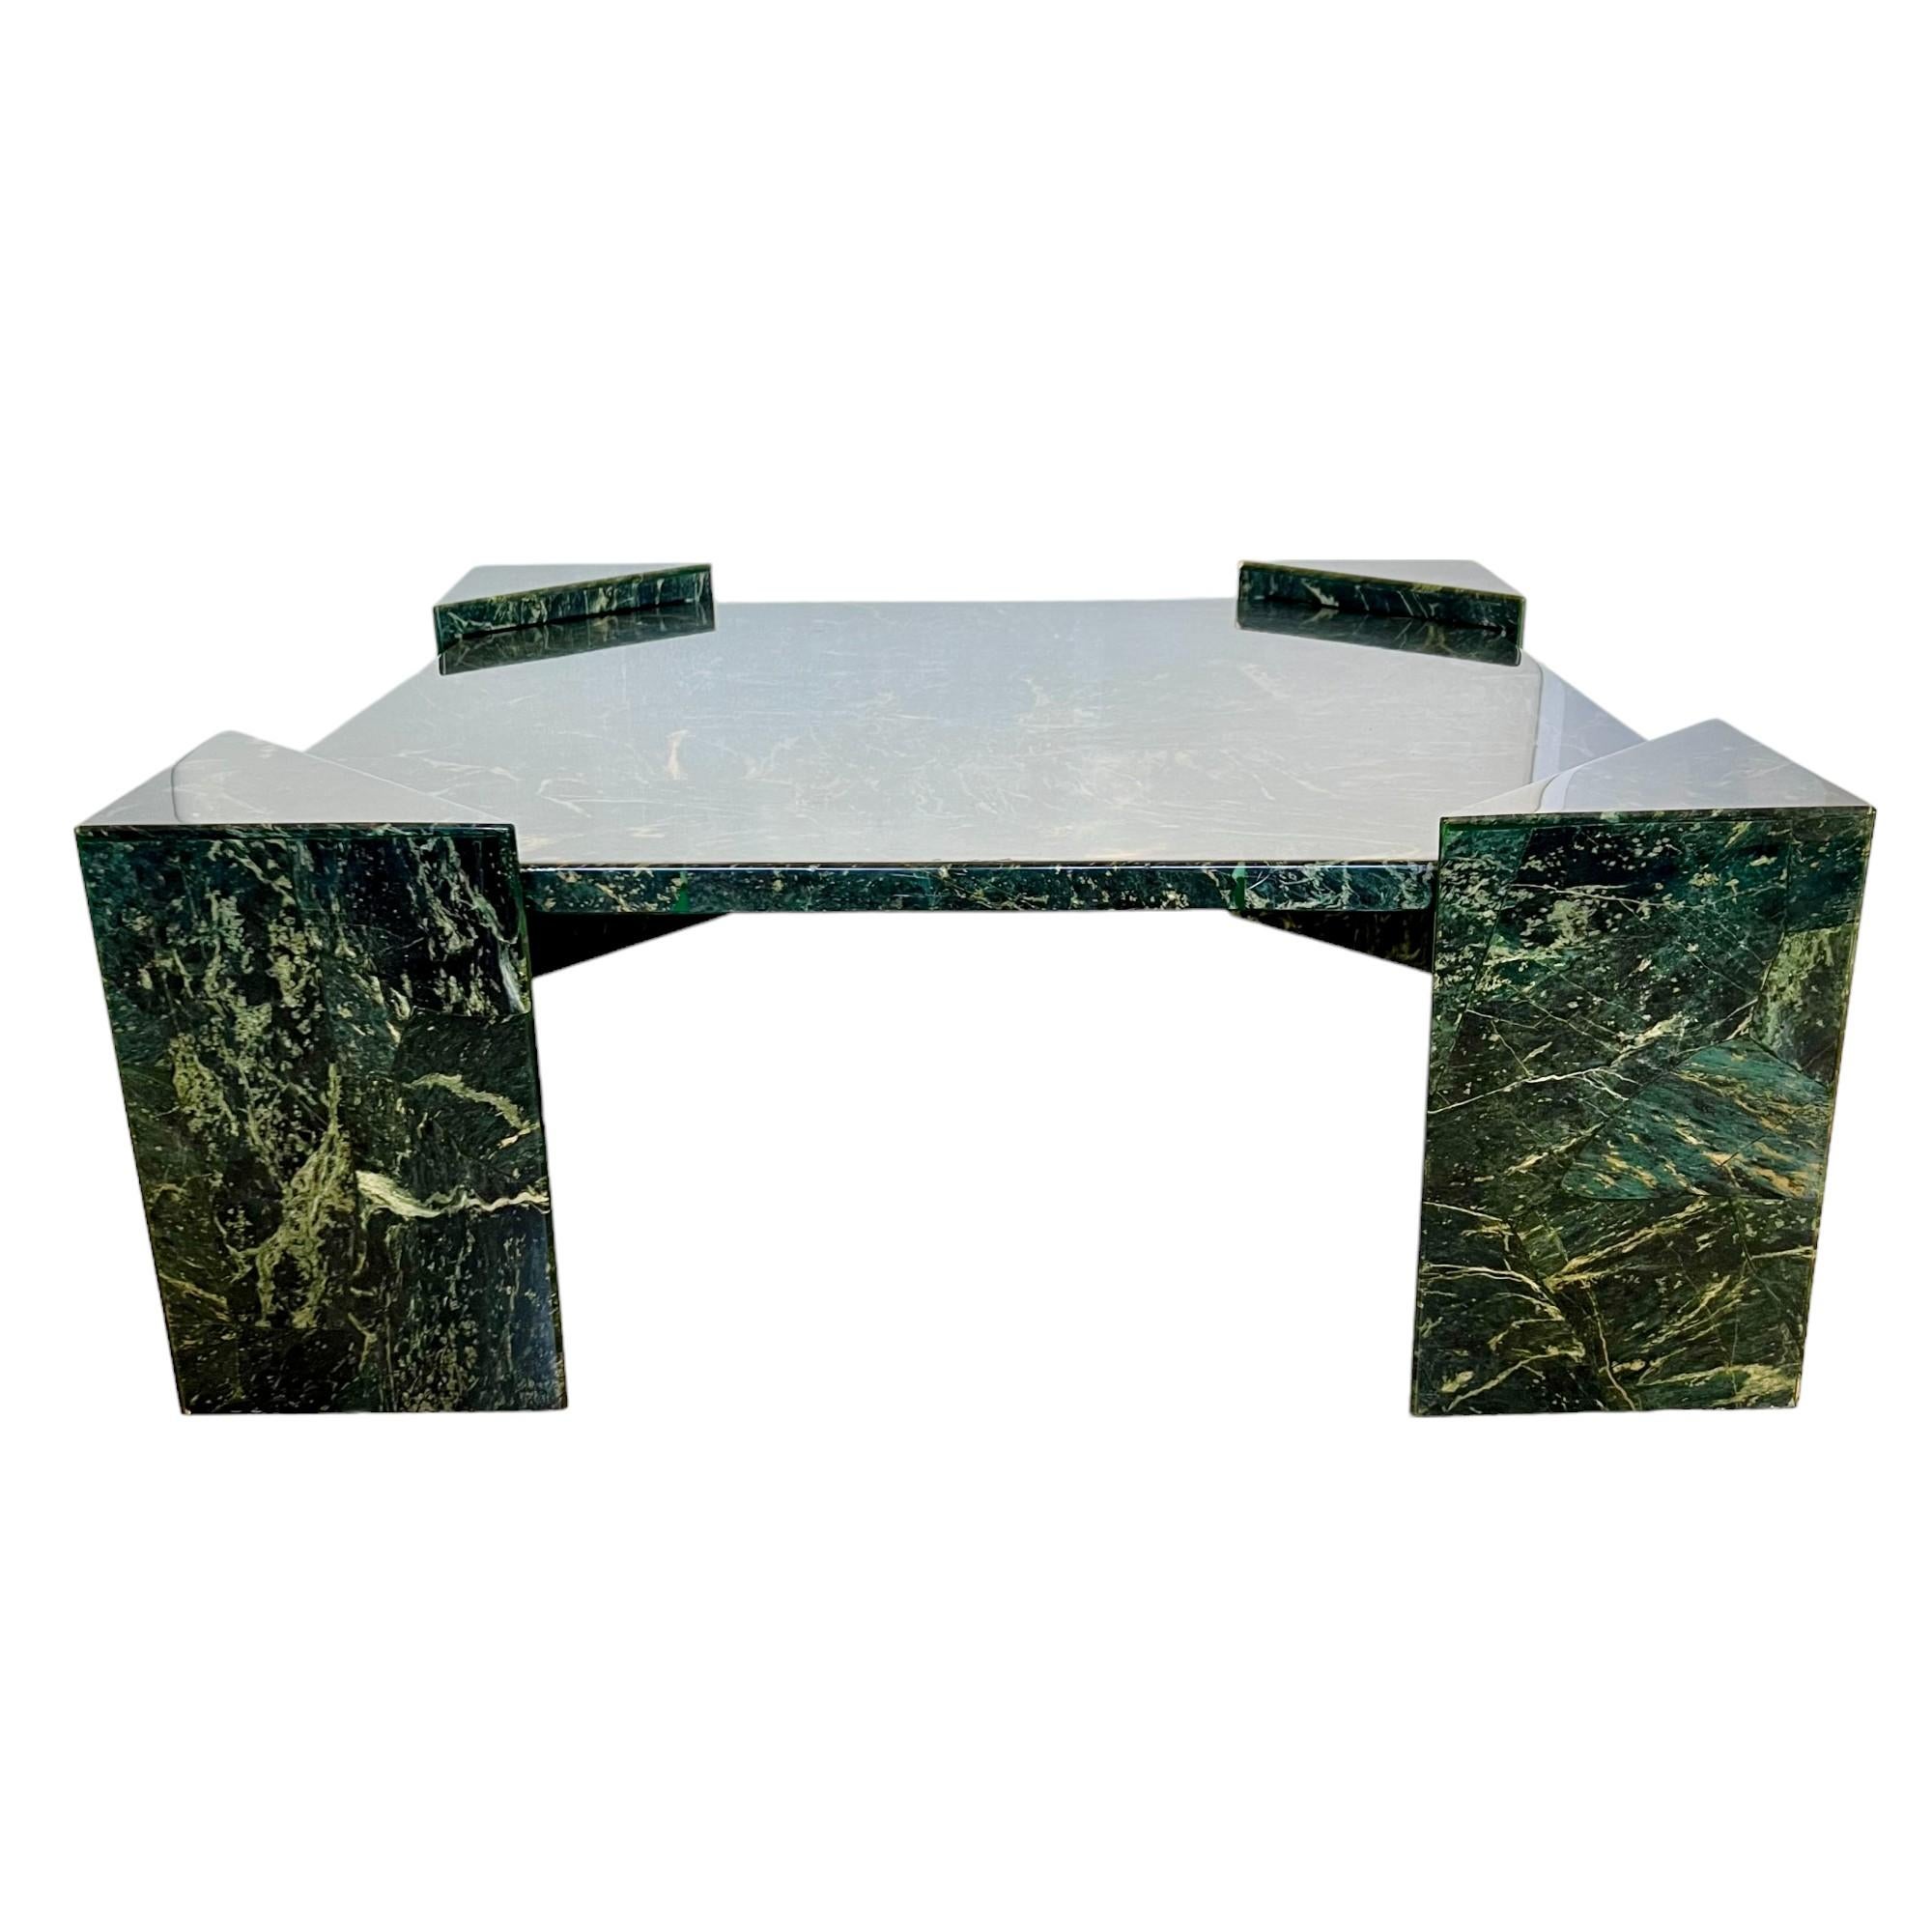 This vintage 1980's modernist style faux marble composite cocktail or coffee table has been skillfully handcrafted out of fiberglass and given a marble effect green gel coat finish with veins in tints of light green and cream. The minimalist design